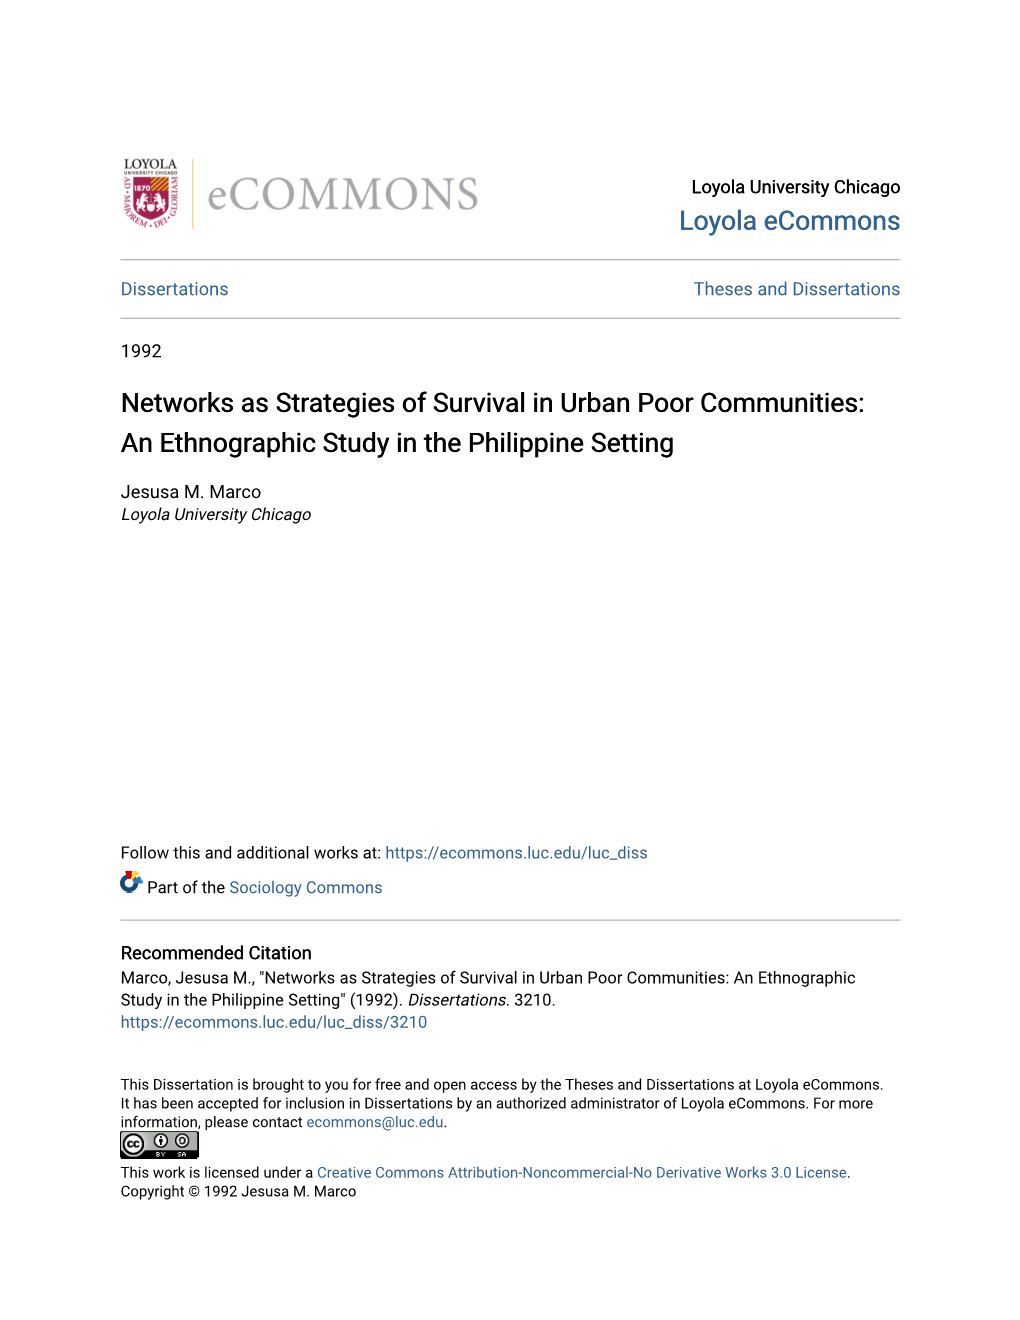 Networks As Strategies of Survival in Urban Poor Communities: an Ethnographic Study in the Philippine Setting